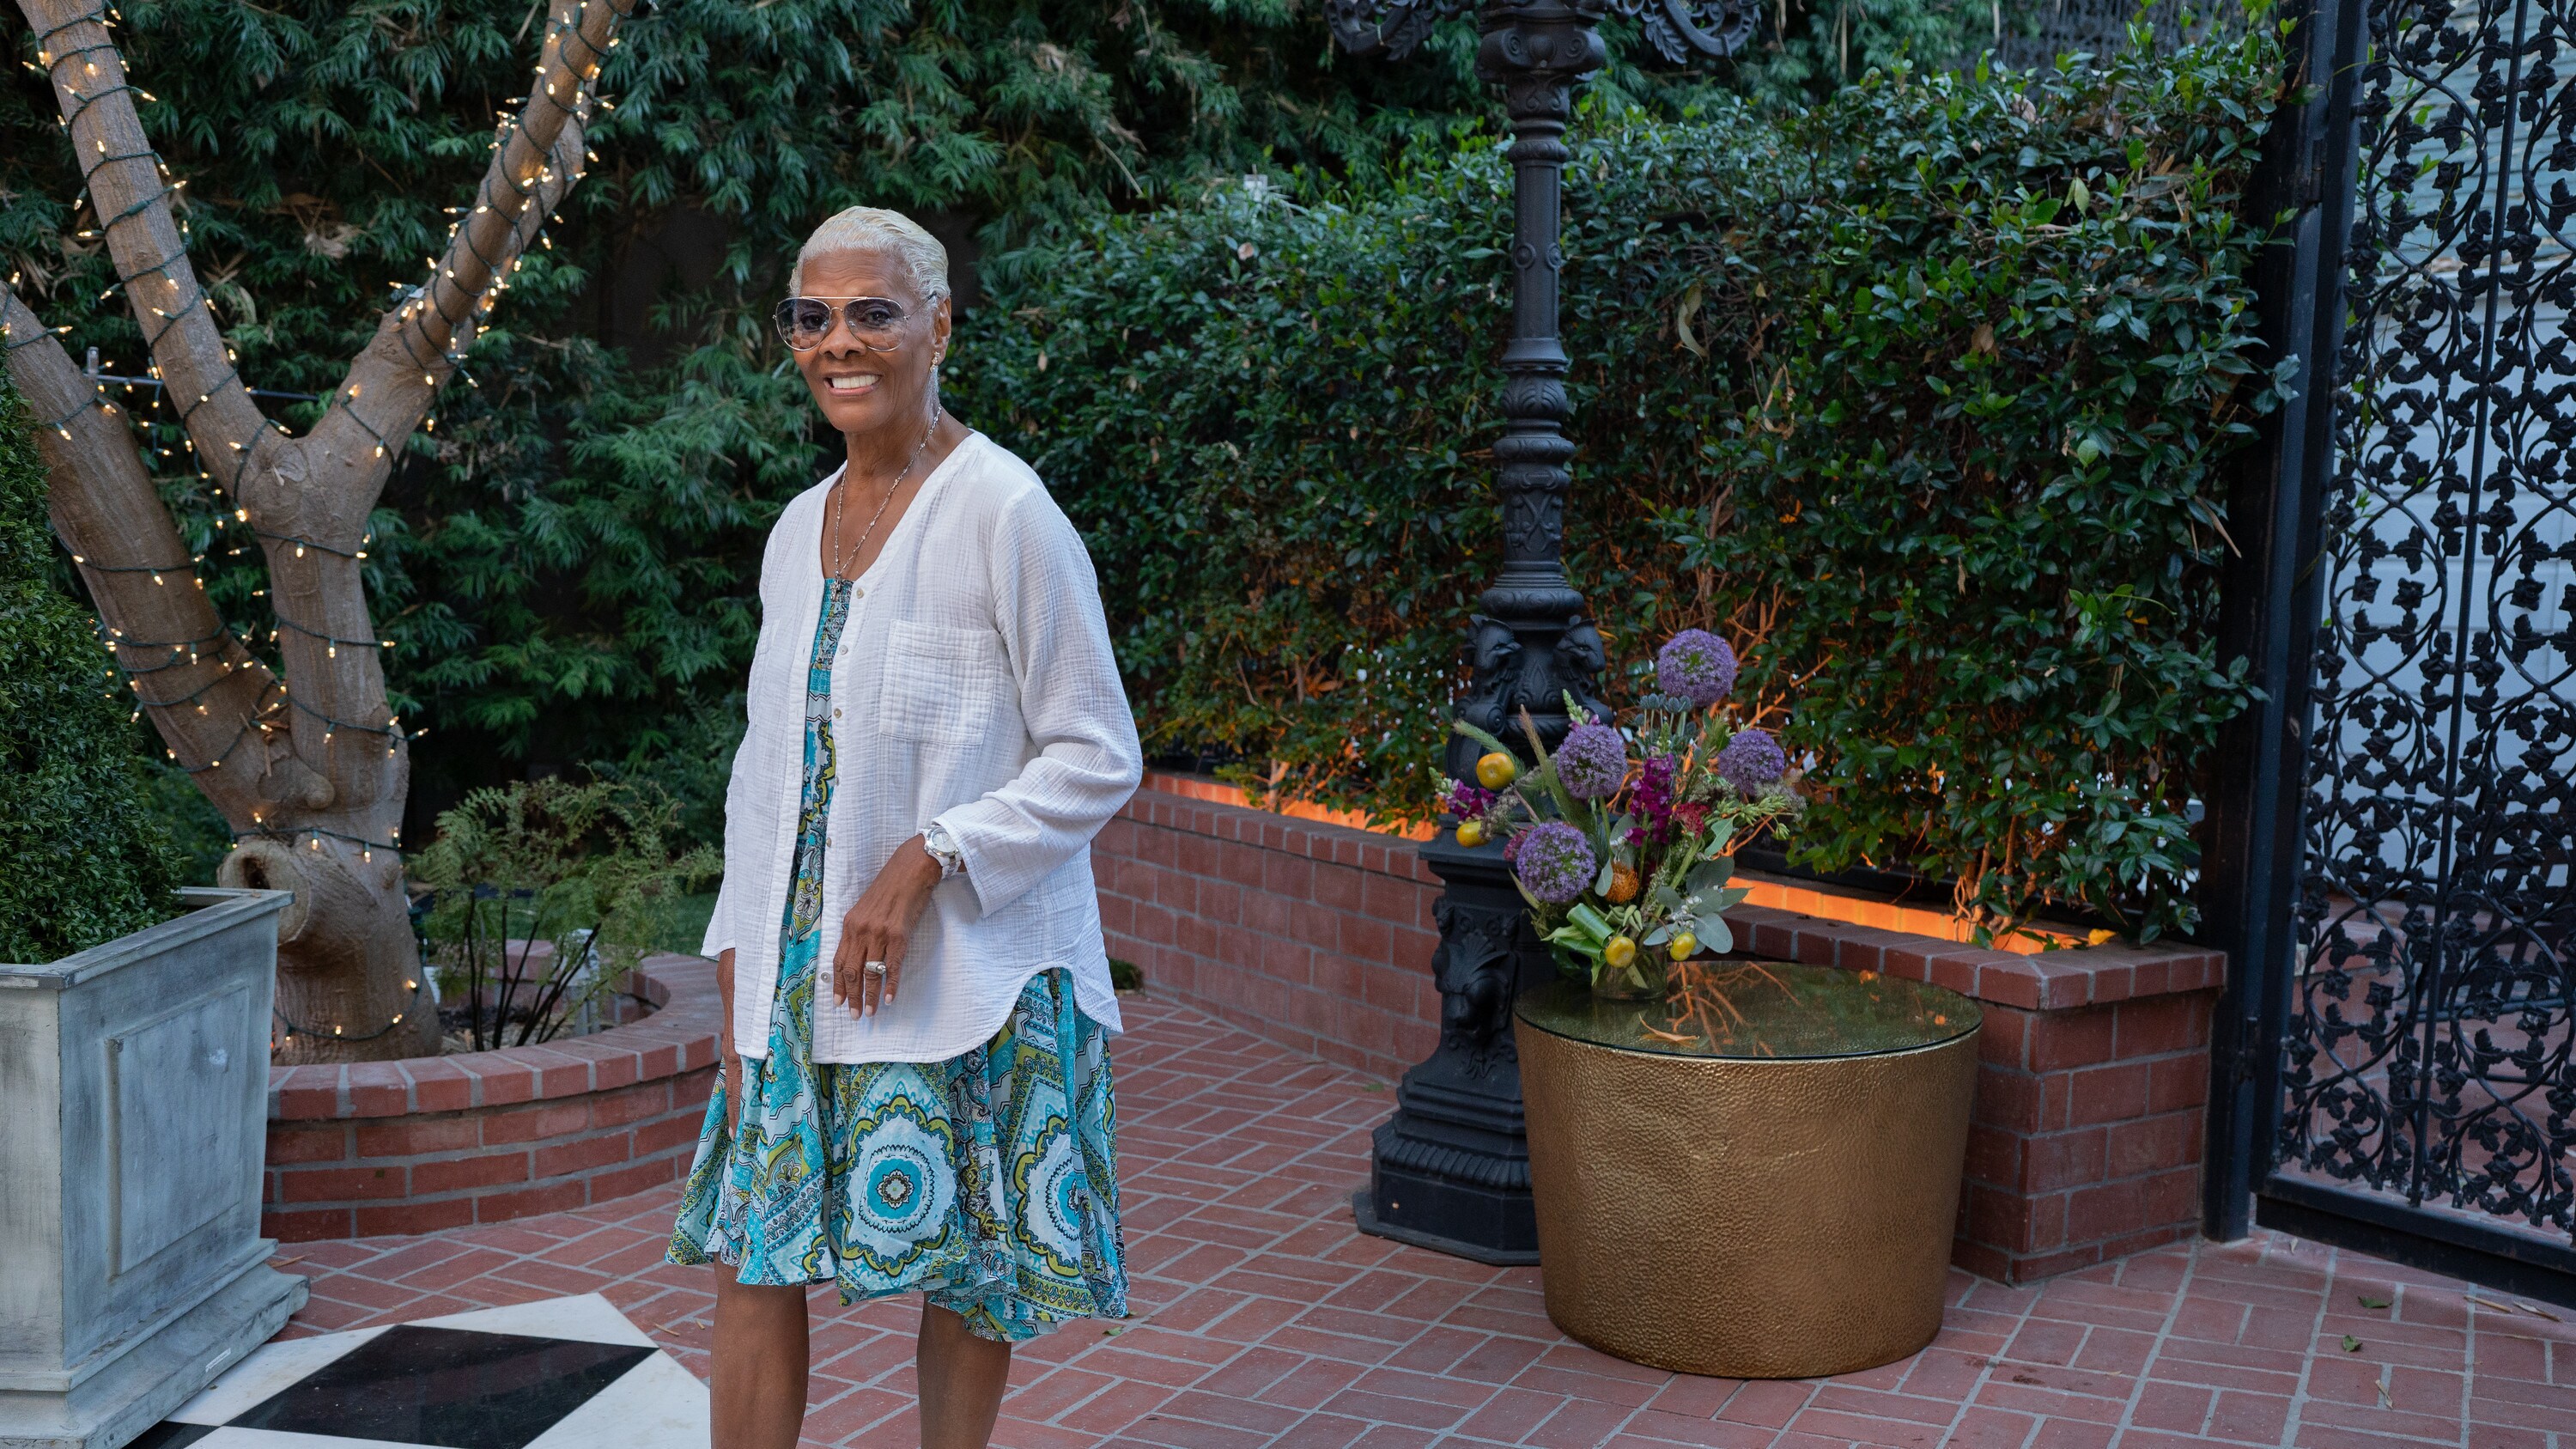 Dionne Warwick on Turning the Tables with Robin Roberts. In season 2 of Turning the Tables with Robin Roberts, Robin Roberts gets personal with a new group of Hollywood's iconic women as they bear witness to their incredible journeys on their path to purpose. (Disney/Ser Baffo)